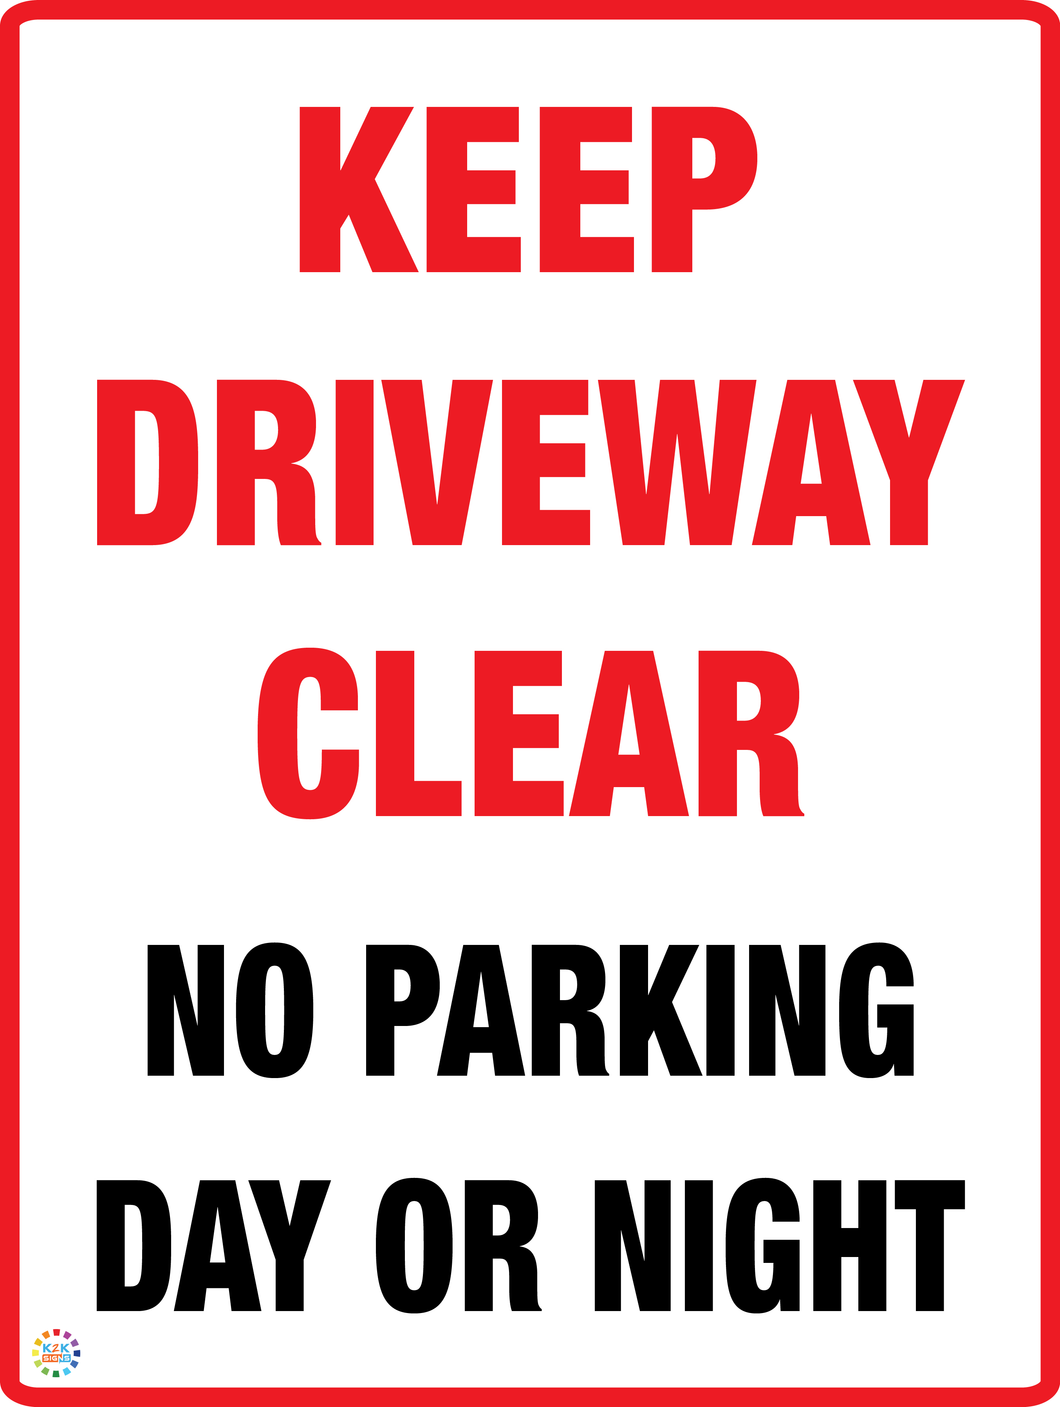 Keep Driveway Clear No Parking Day Or Night Sign